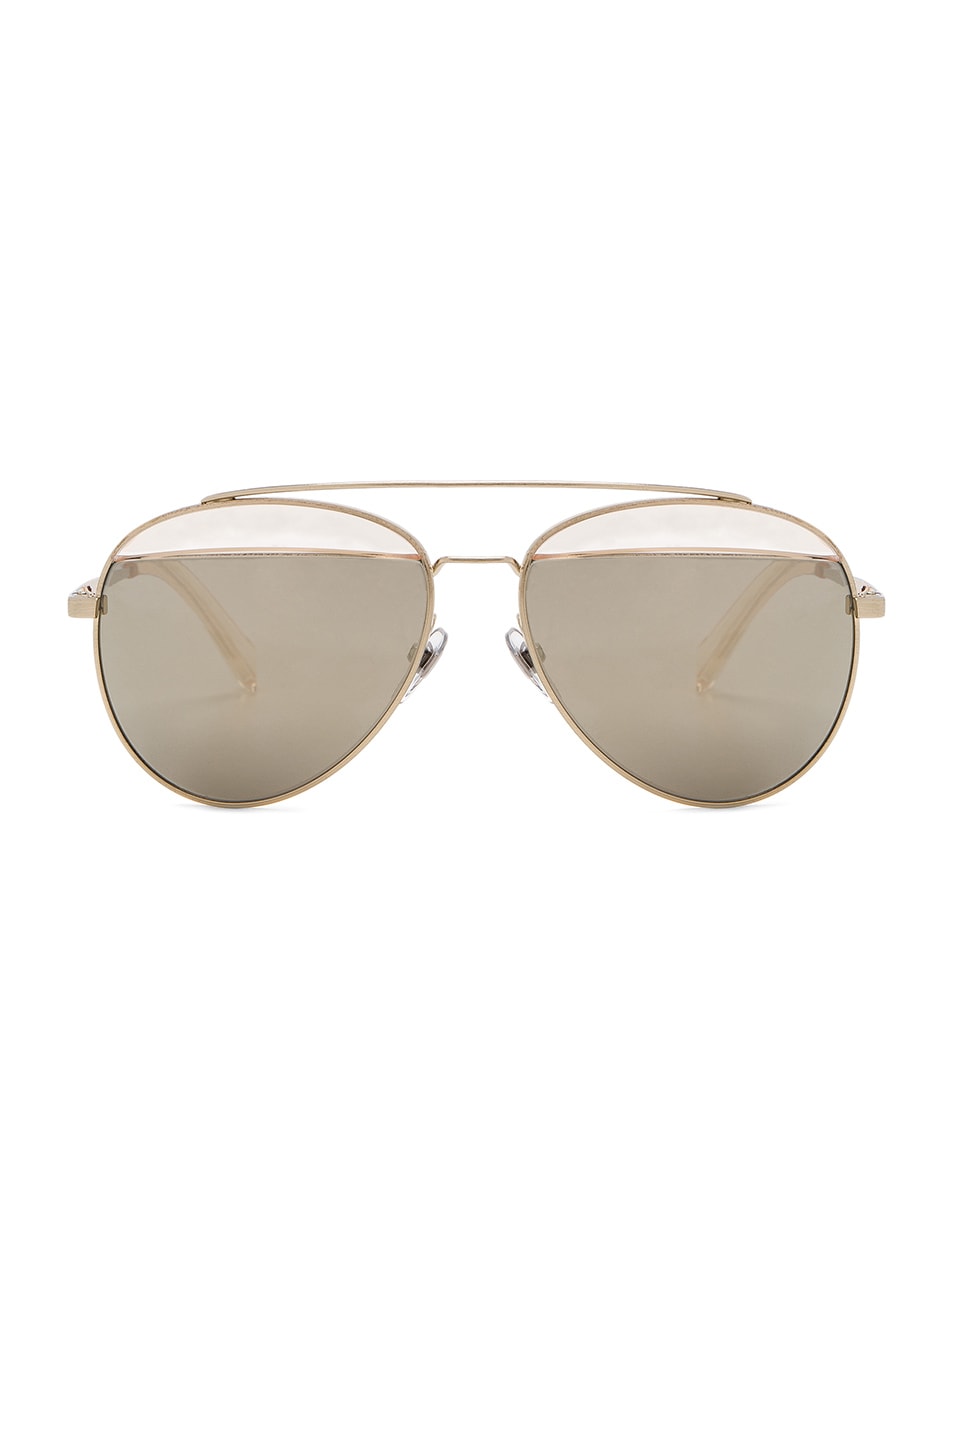 Image 1 of Oliver Peoples x Alain Mikli Aviator Sunglasses in Gold & Taupe Mirror